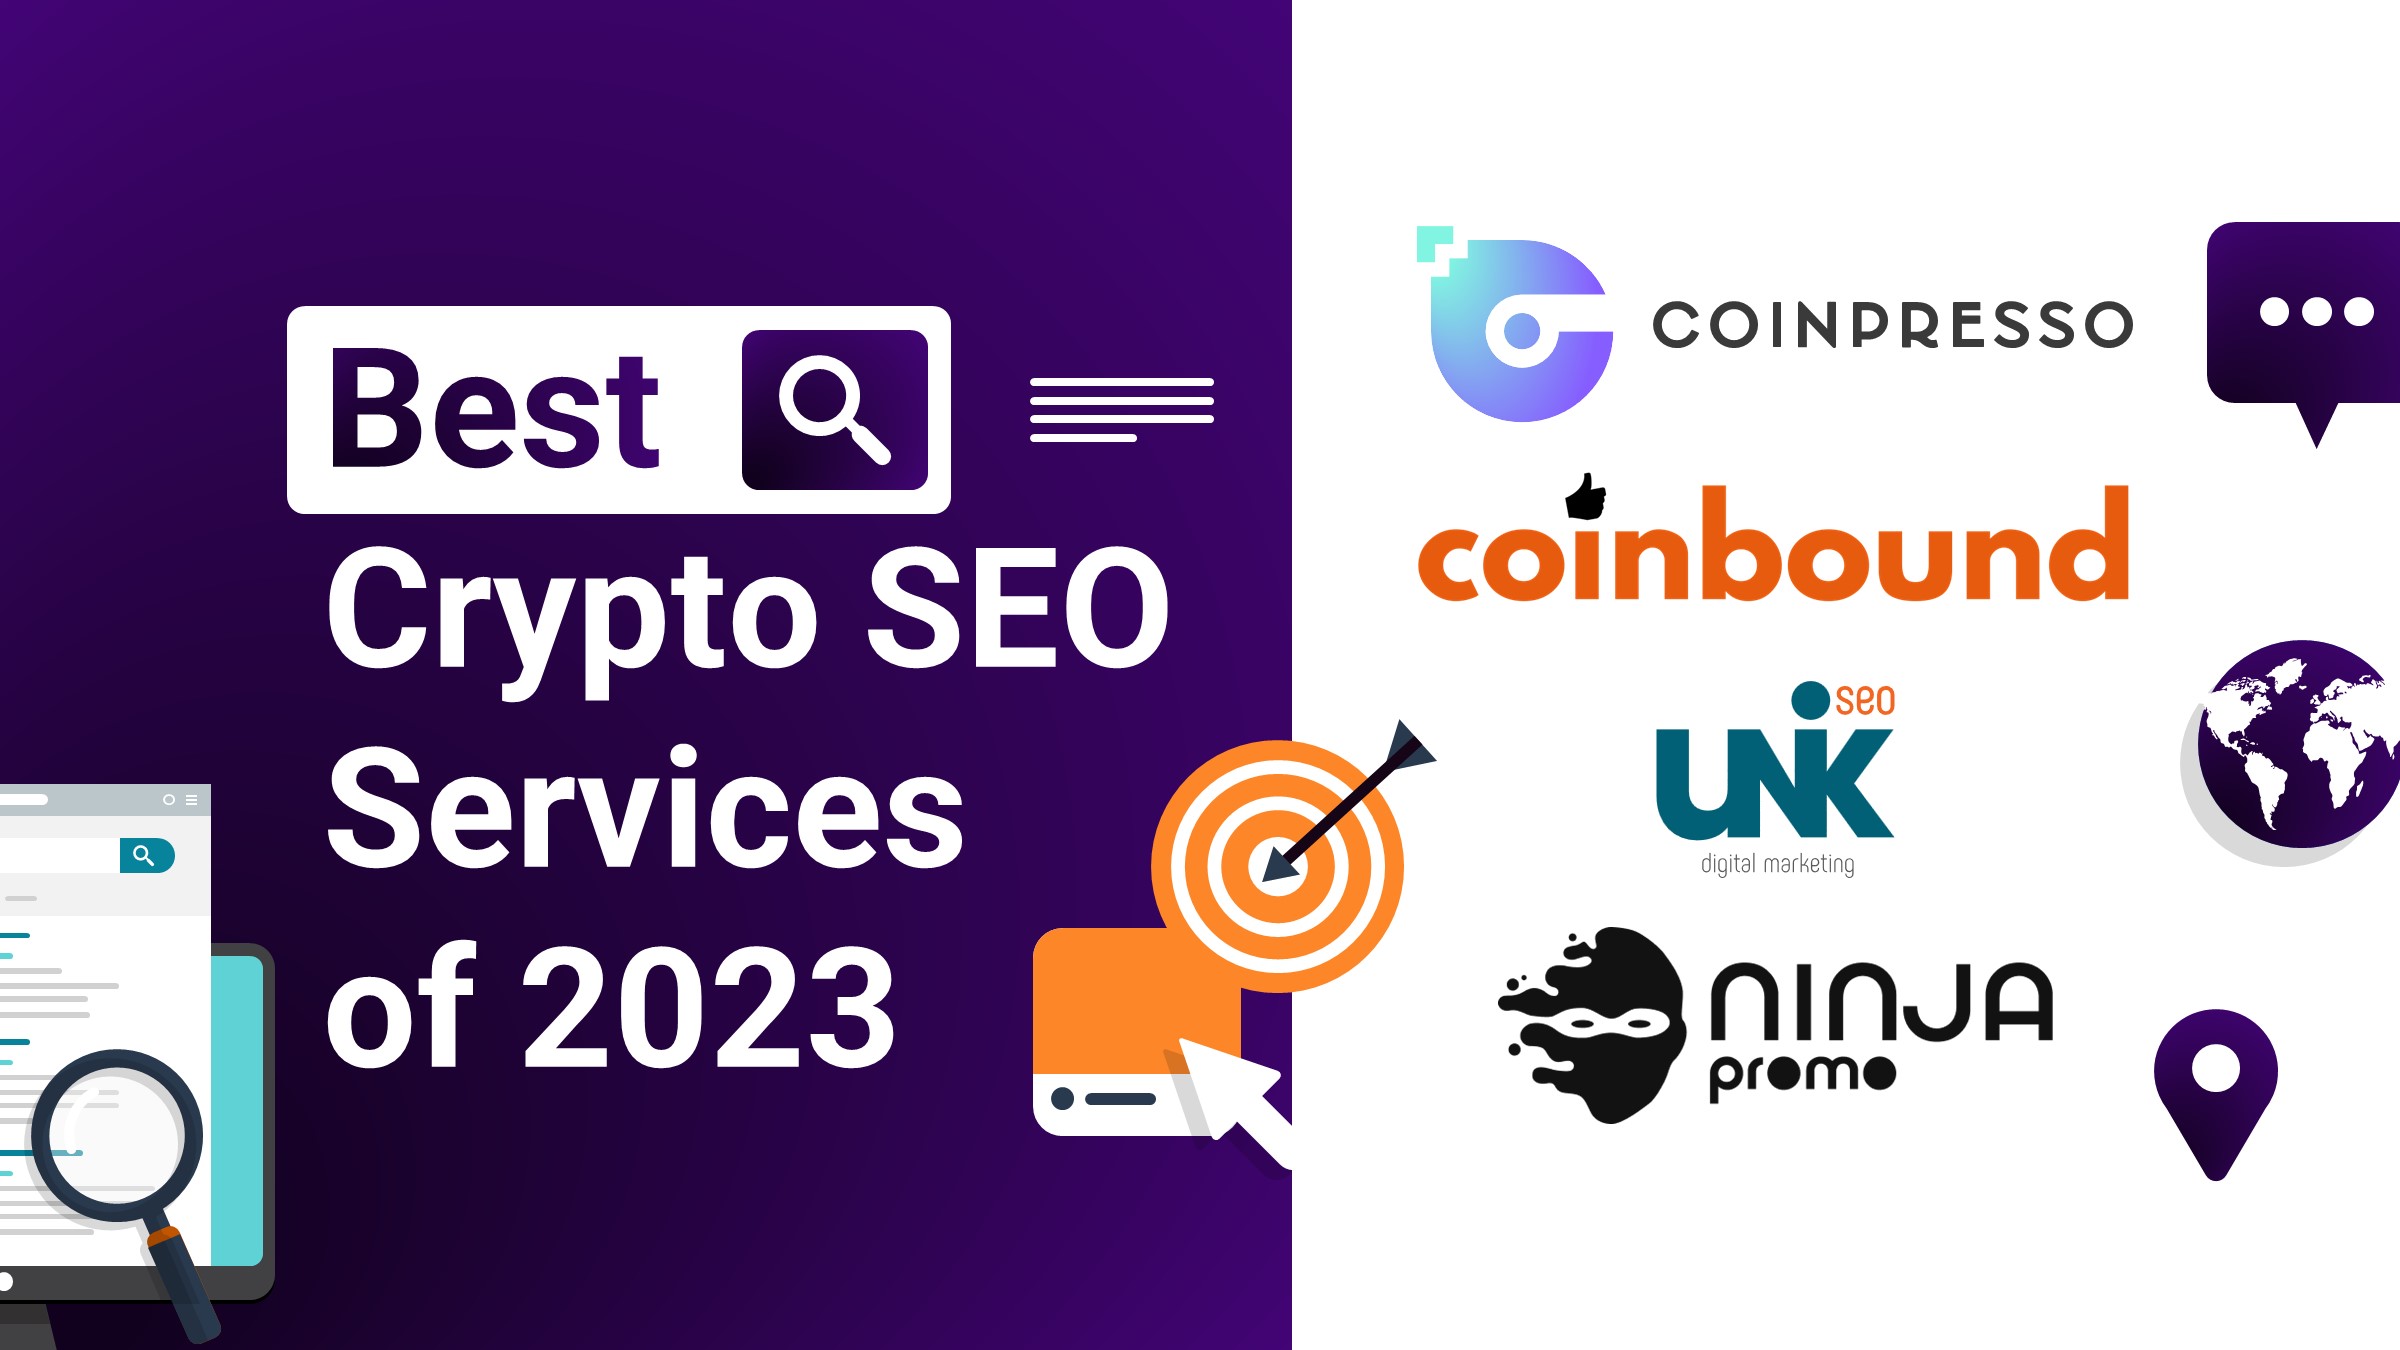 Best Crypto SEO Services of 2023